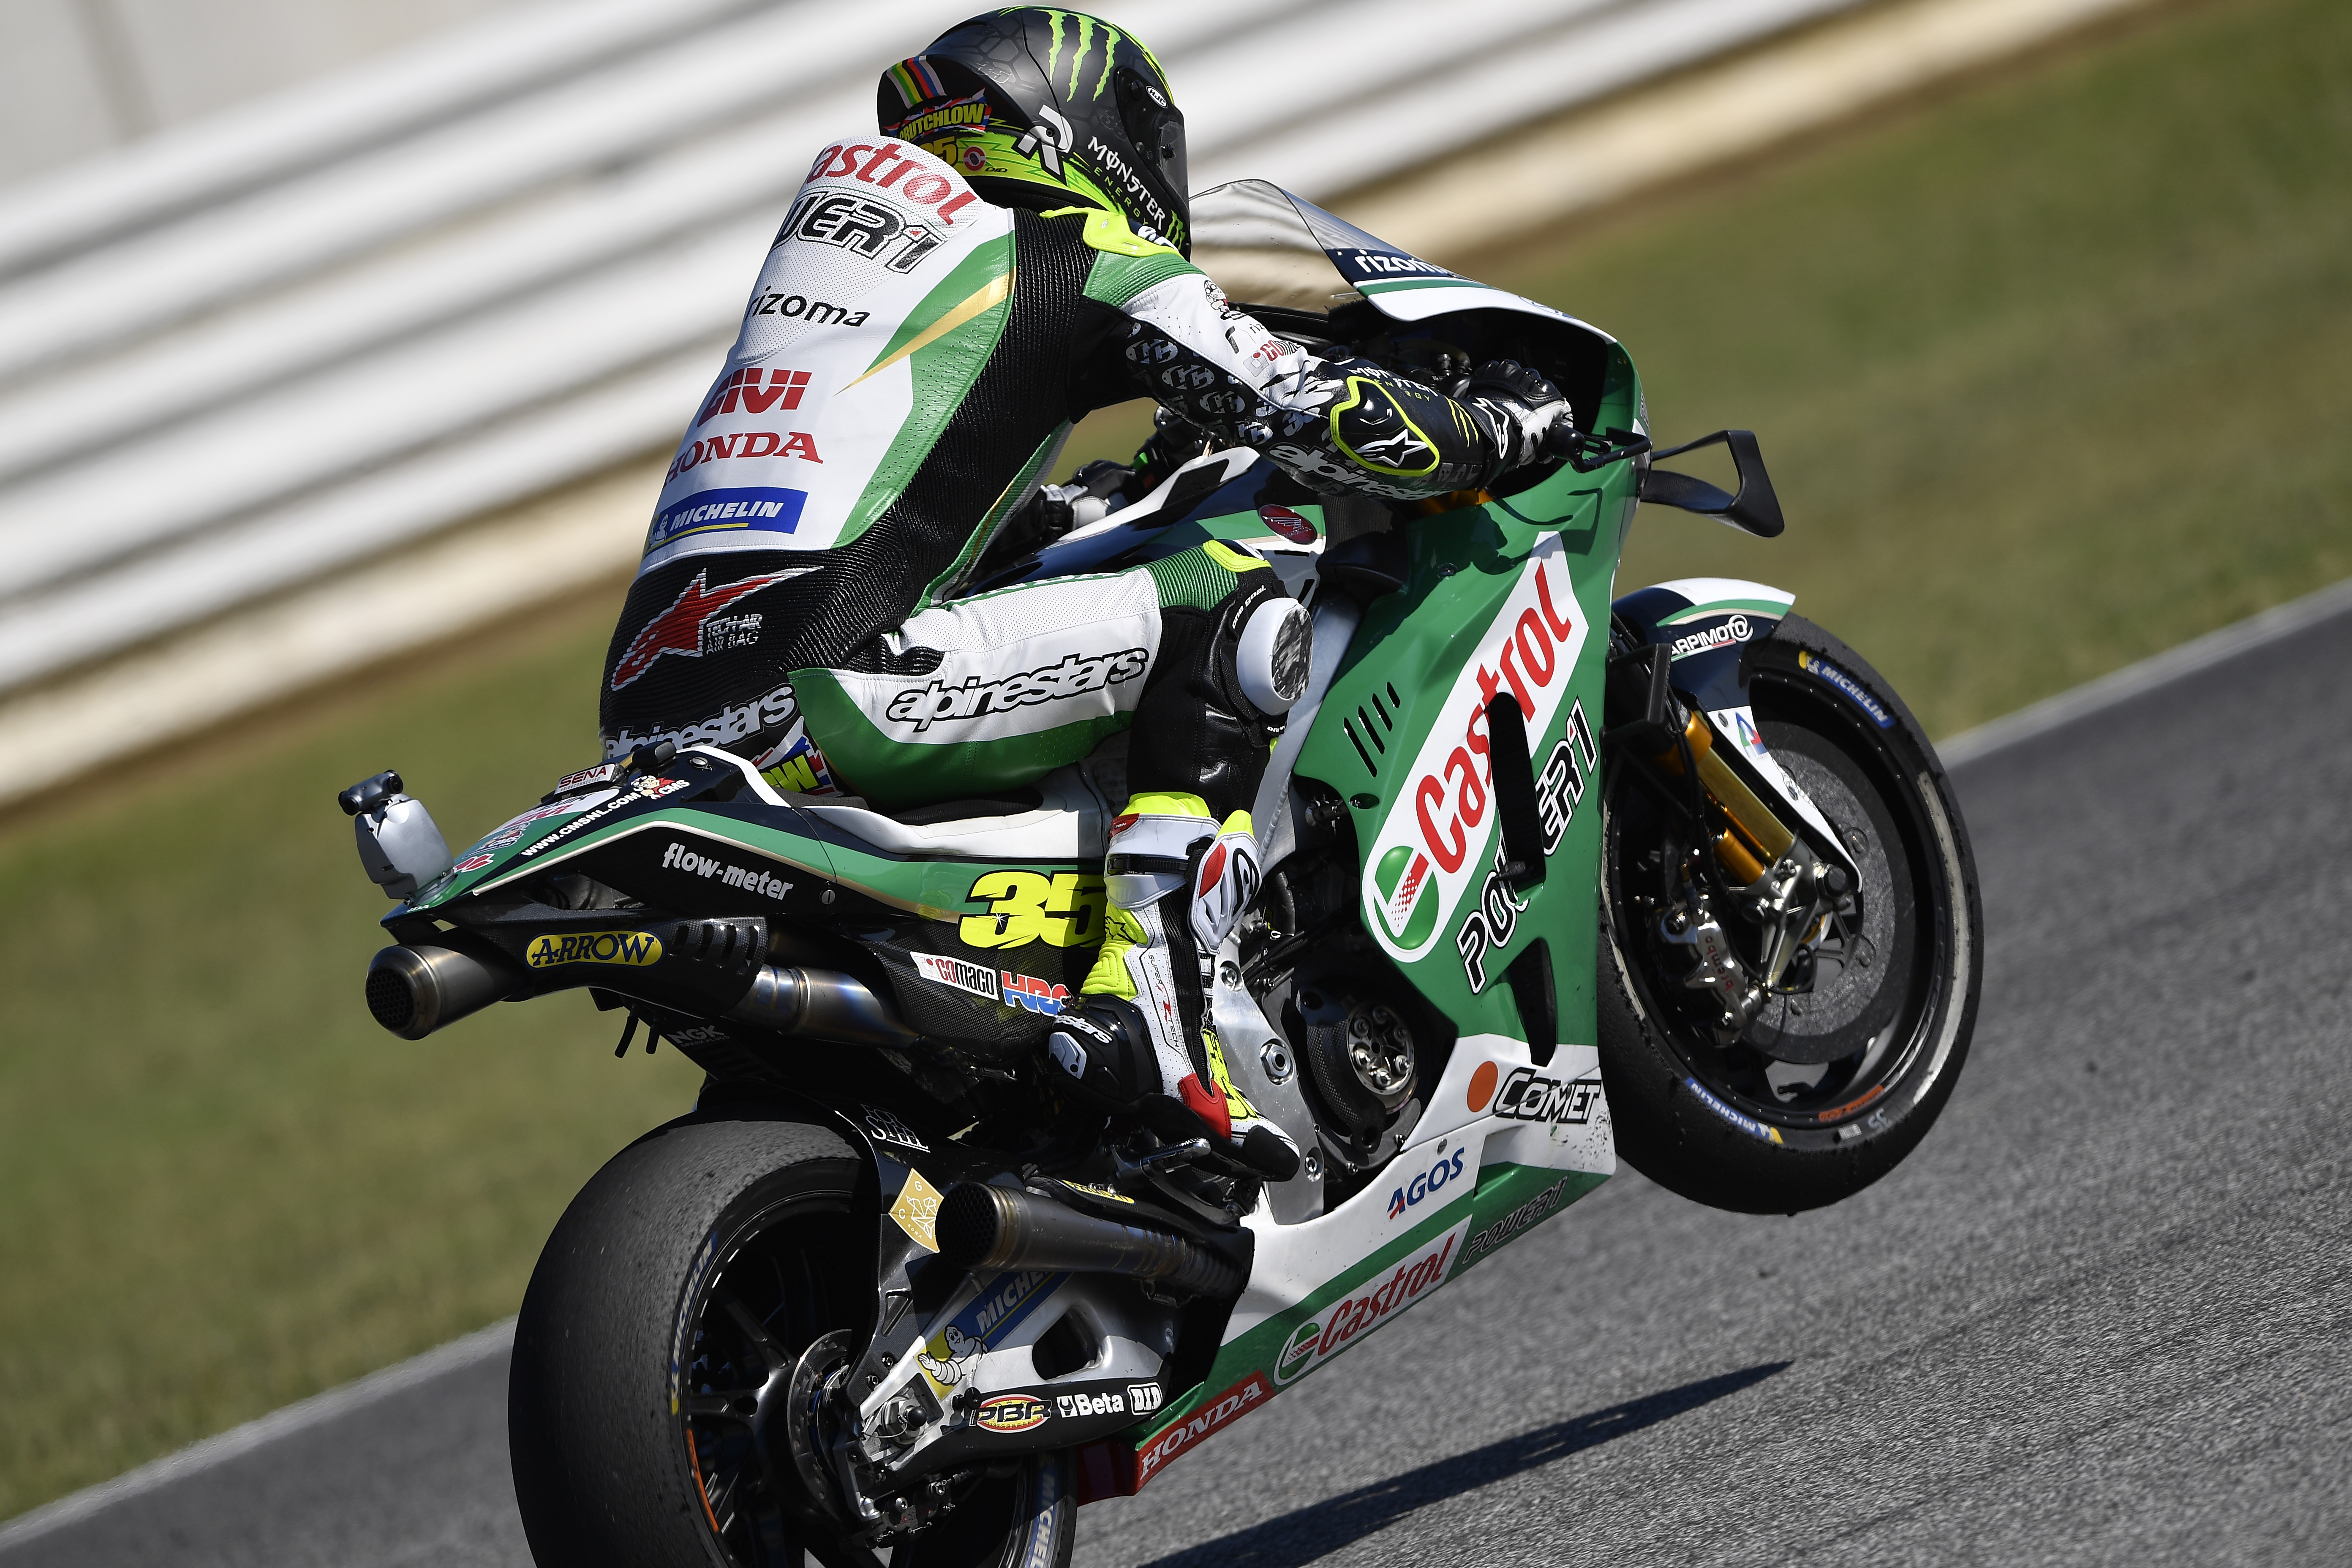 Top 10 for Crutchlow as San Marino action starts